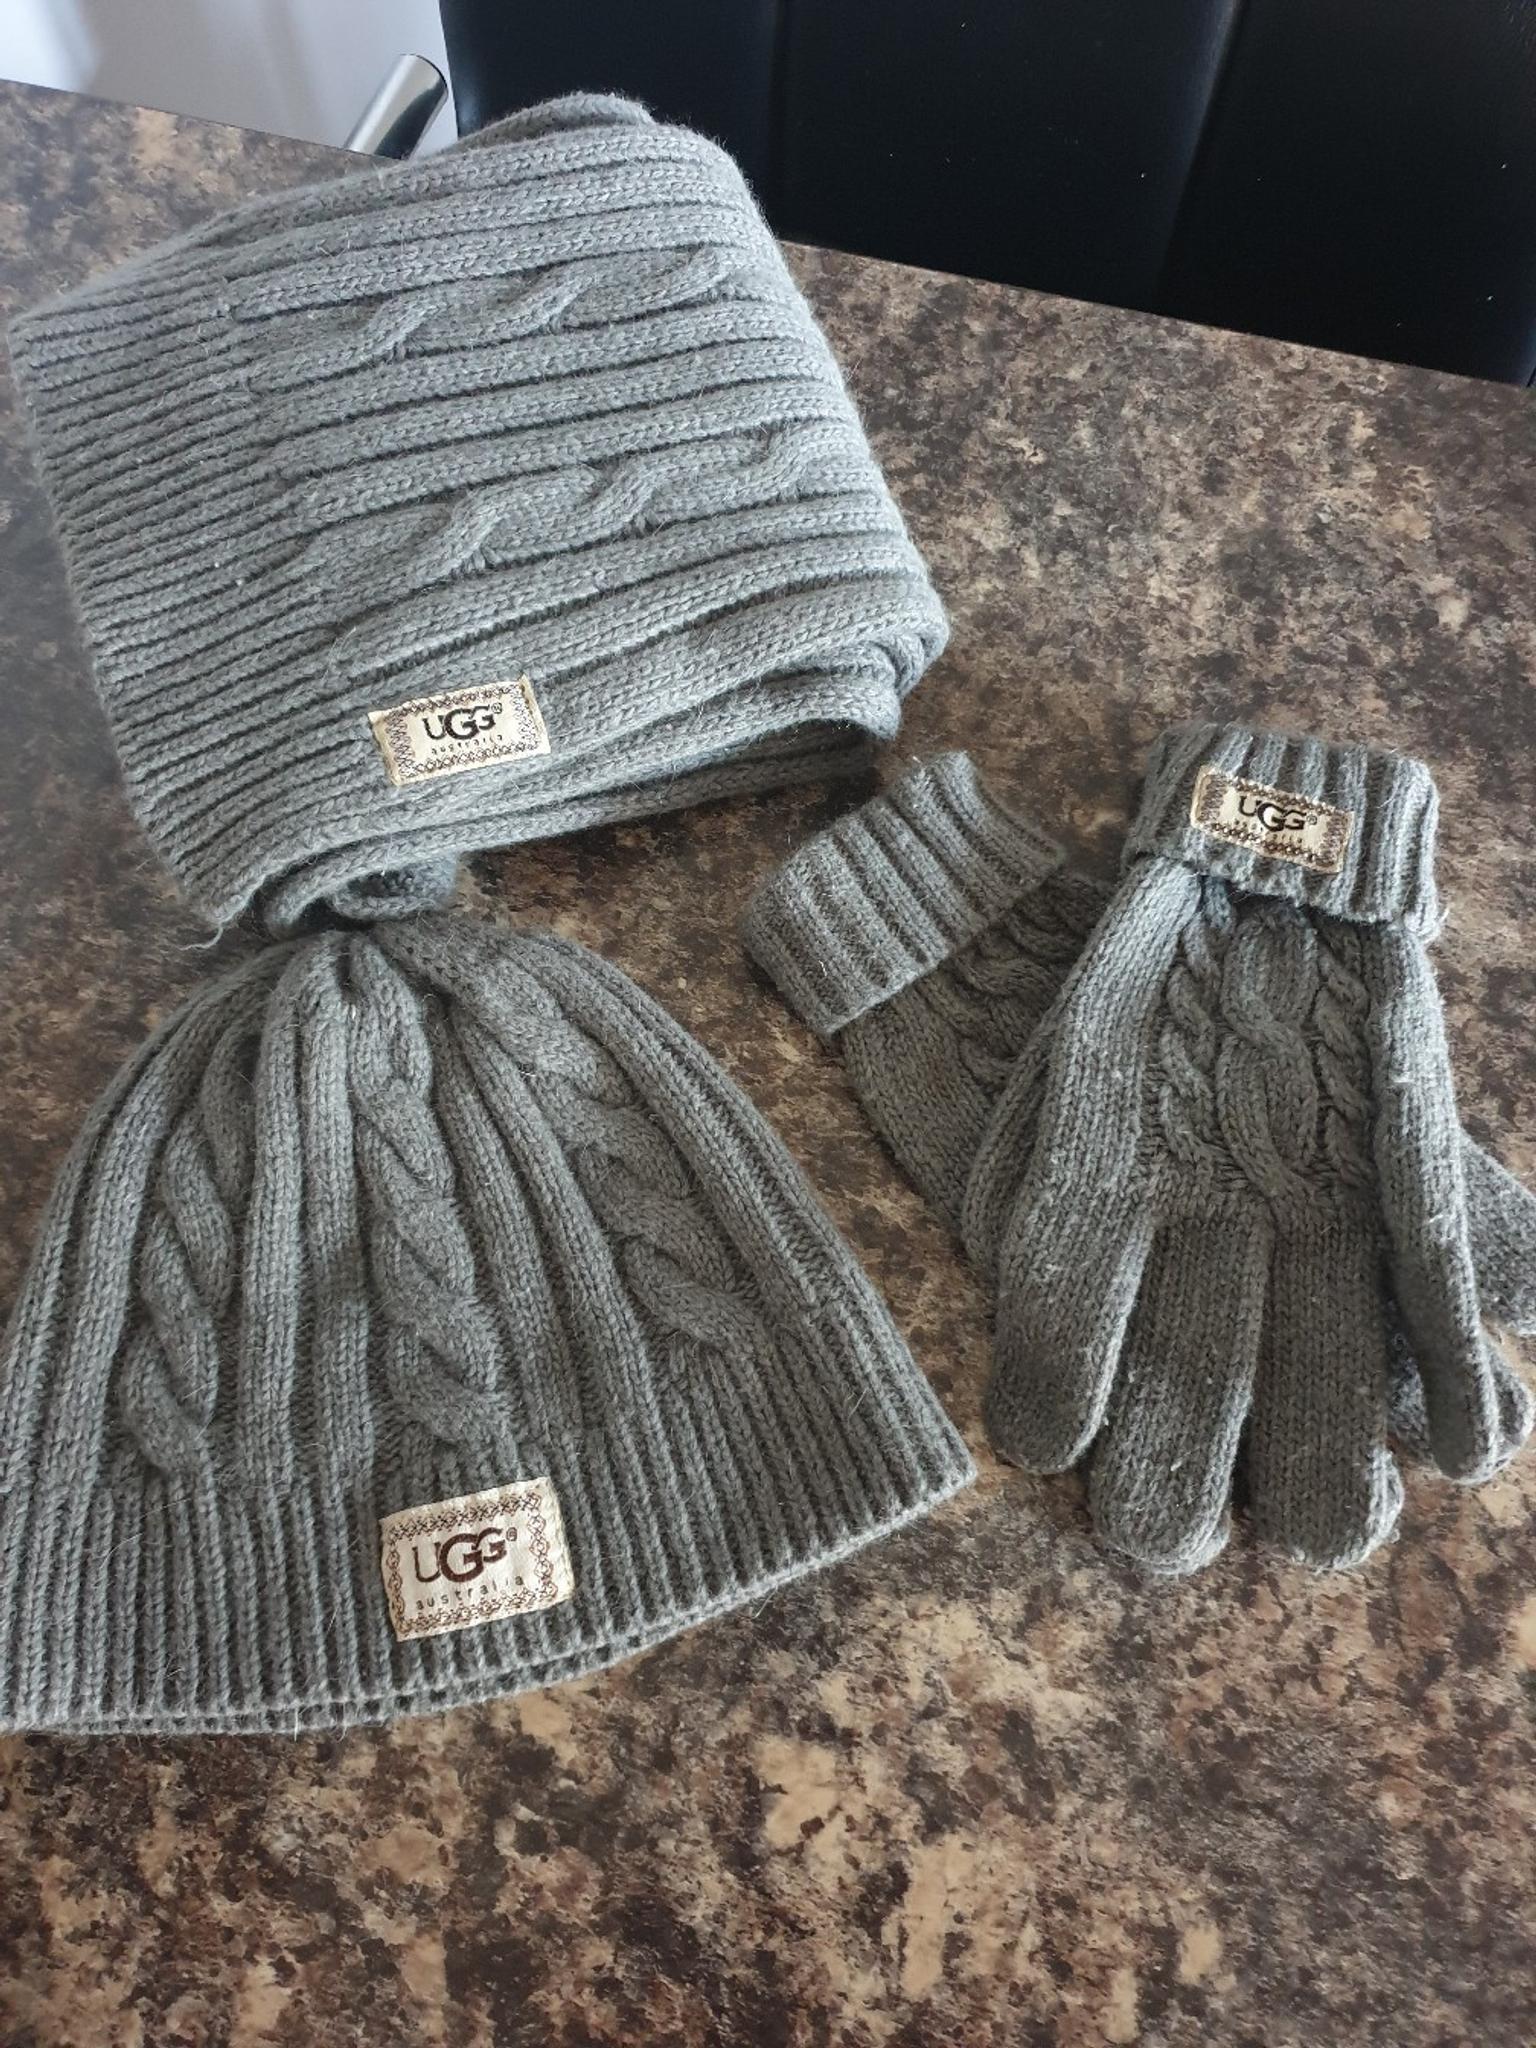 ugg hat scarf and gloves box set